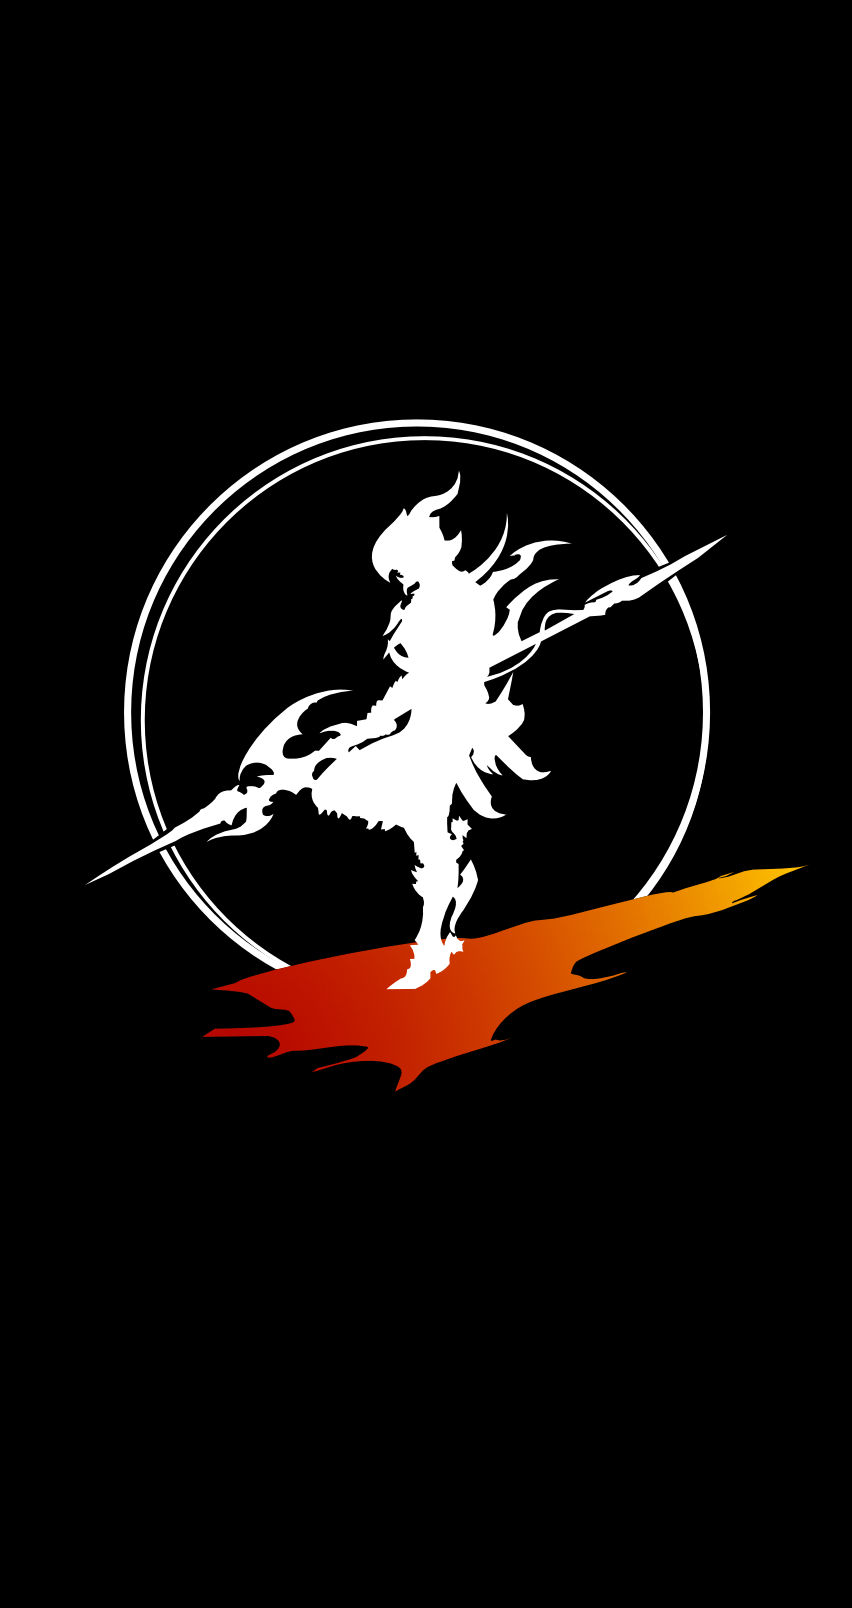 Made this dragoon wallpaper for my phone while I was bored